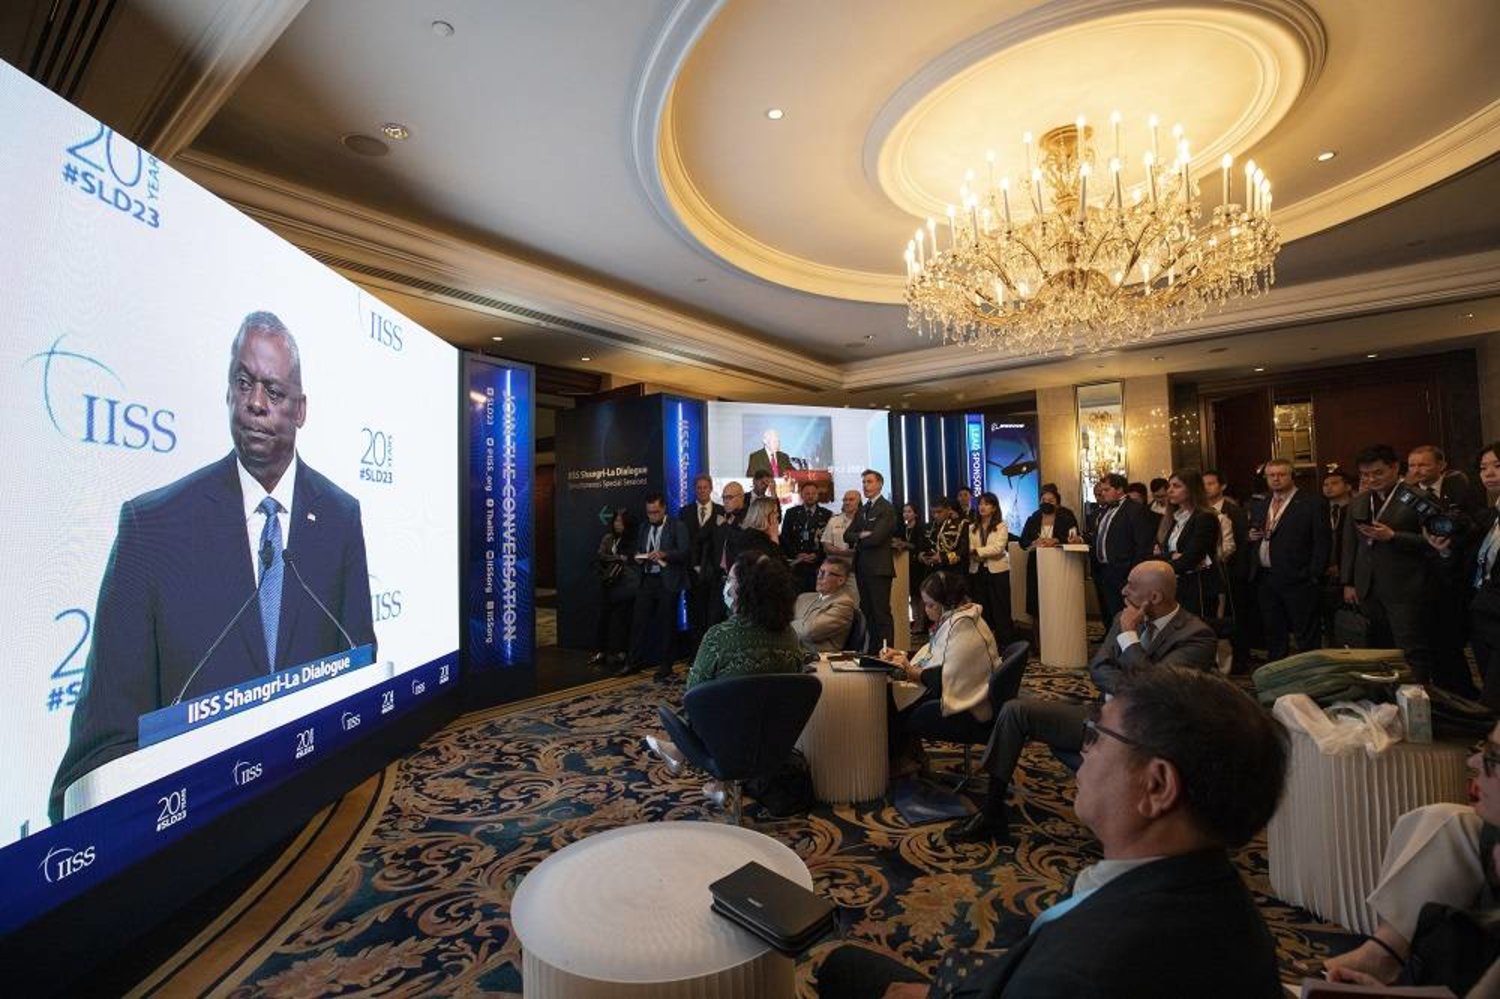 Attendees watch a livestream of US Secretary of Defense Lloyd Austin speaking during a plenary session on a screen outside the main hall during the International Institute for Strategic Studies (IISS) Shangri-La Dialogue at the Shangri-La hotel in Singapore, 03 June 2023. (EPA) 